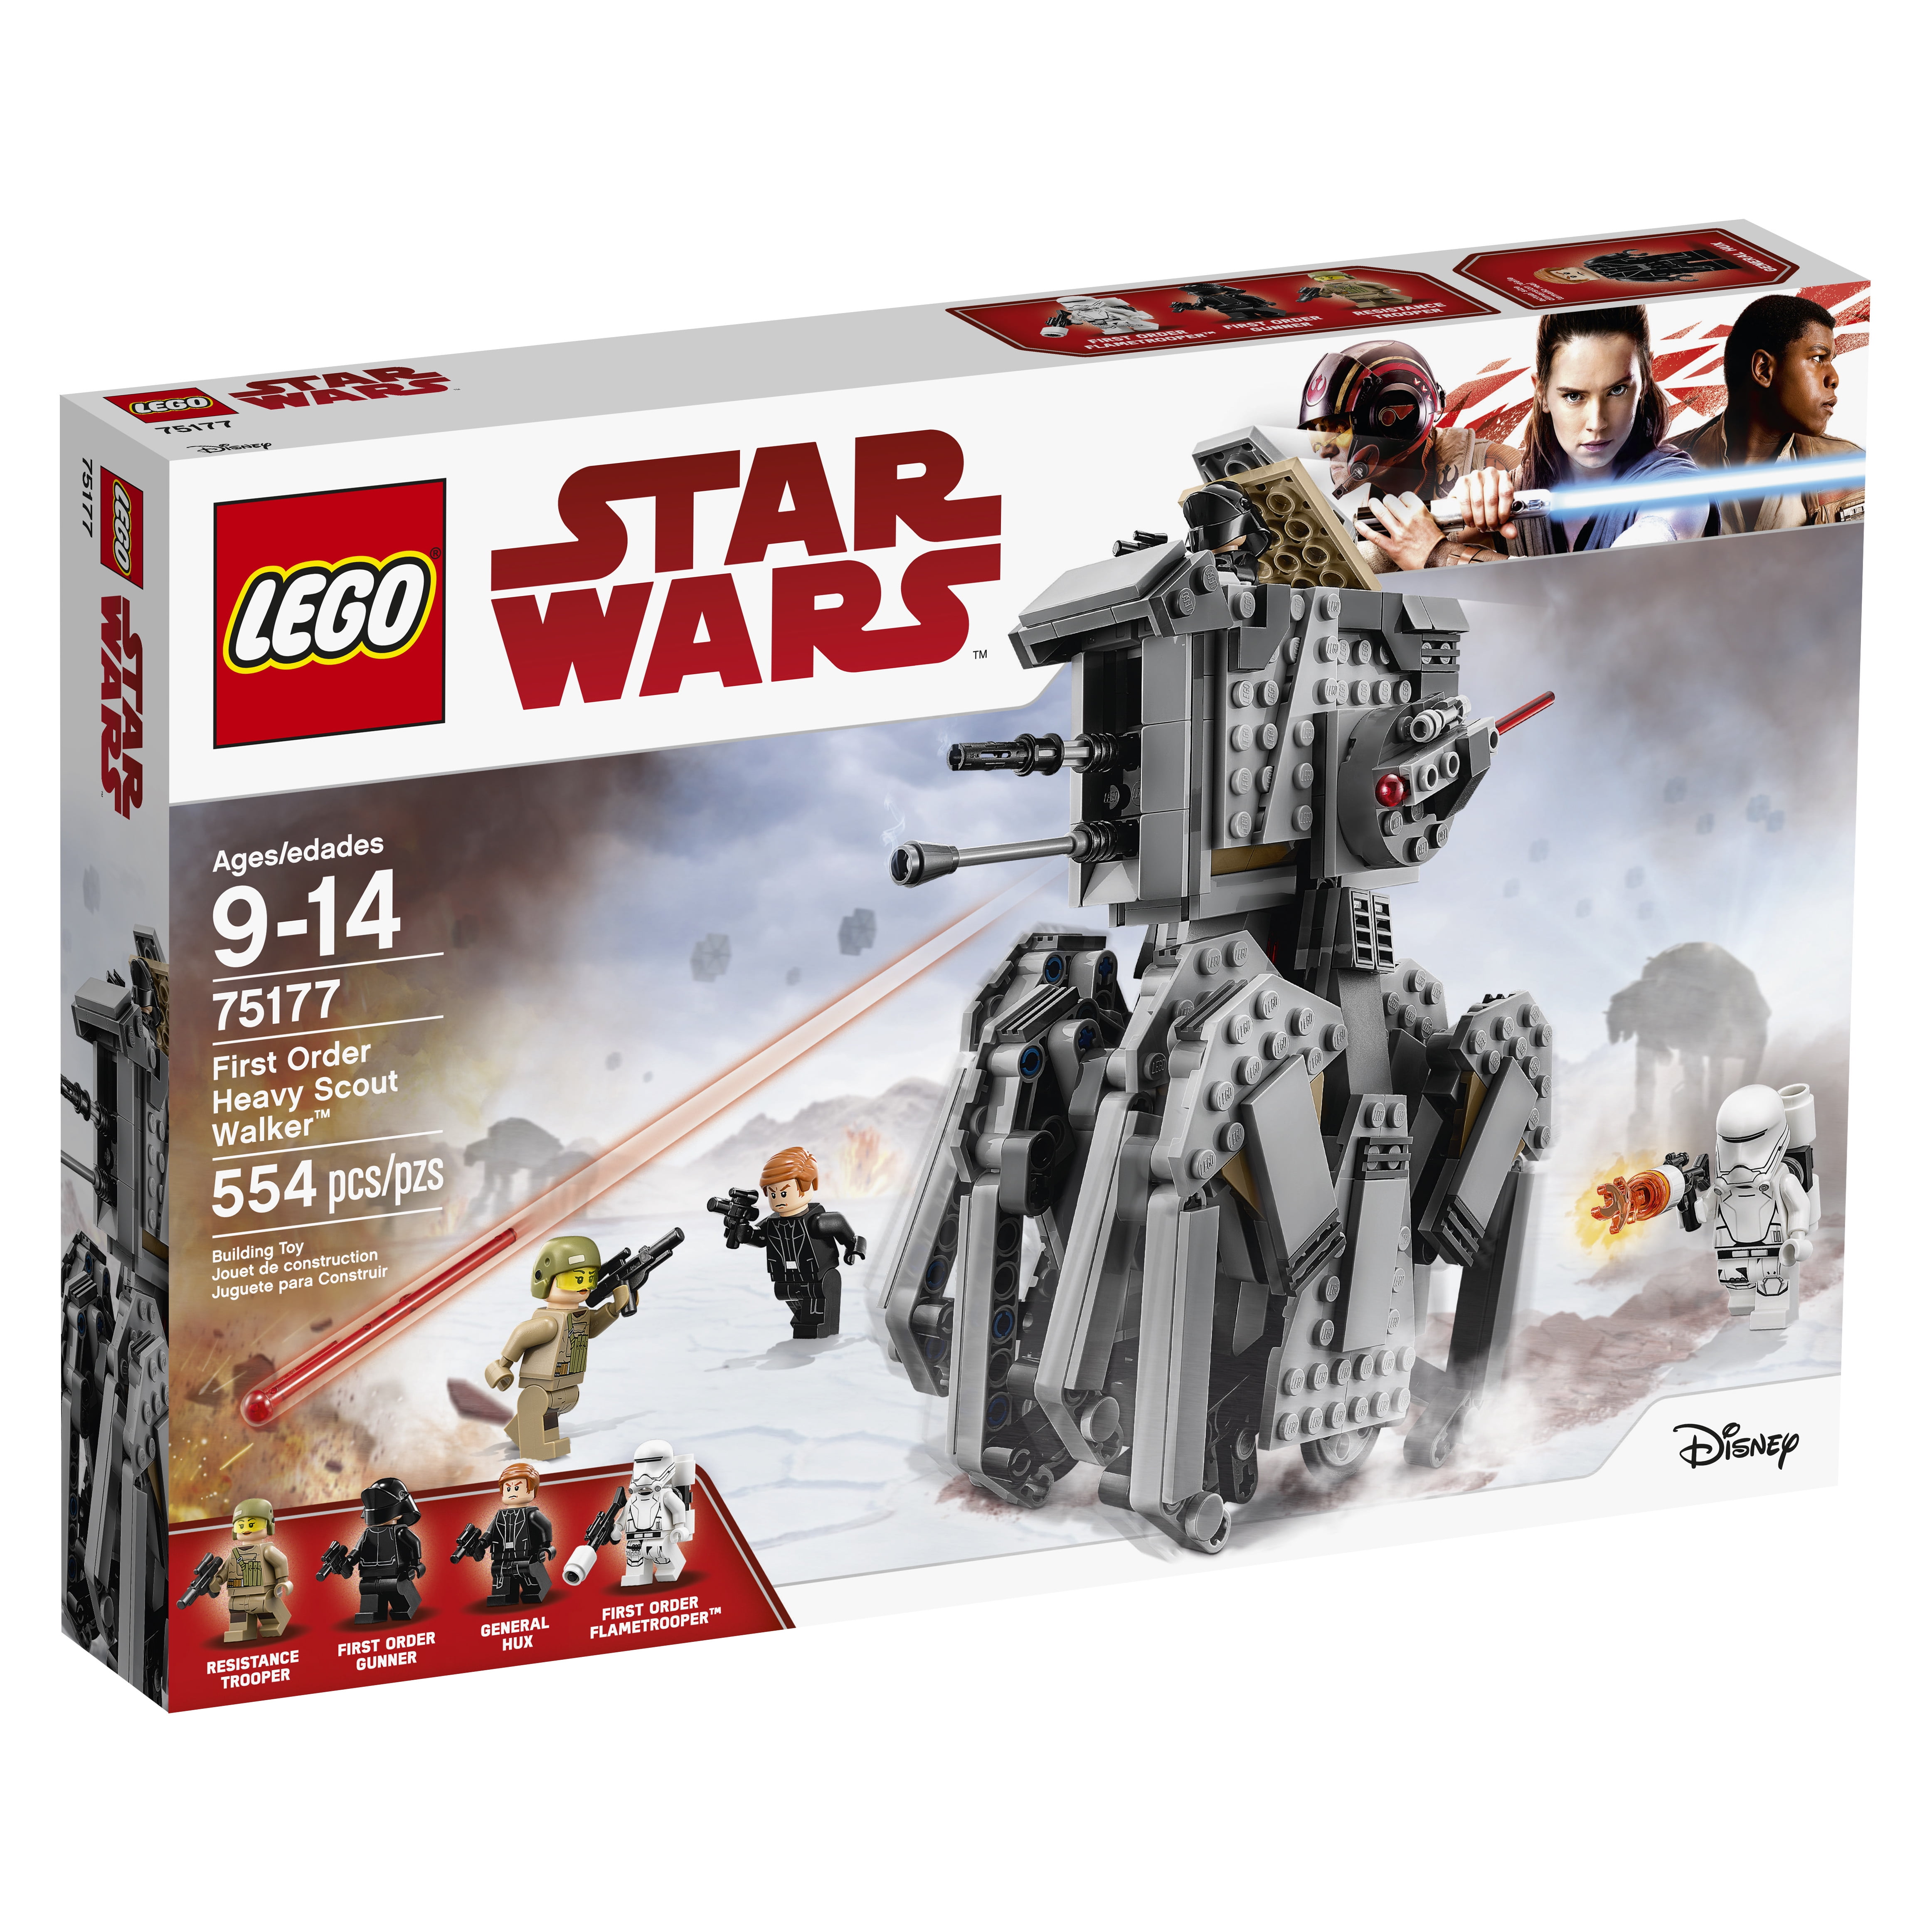 LEGO Wars TM First Order Heavy Scout 75177 -